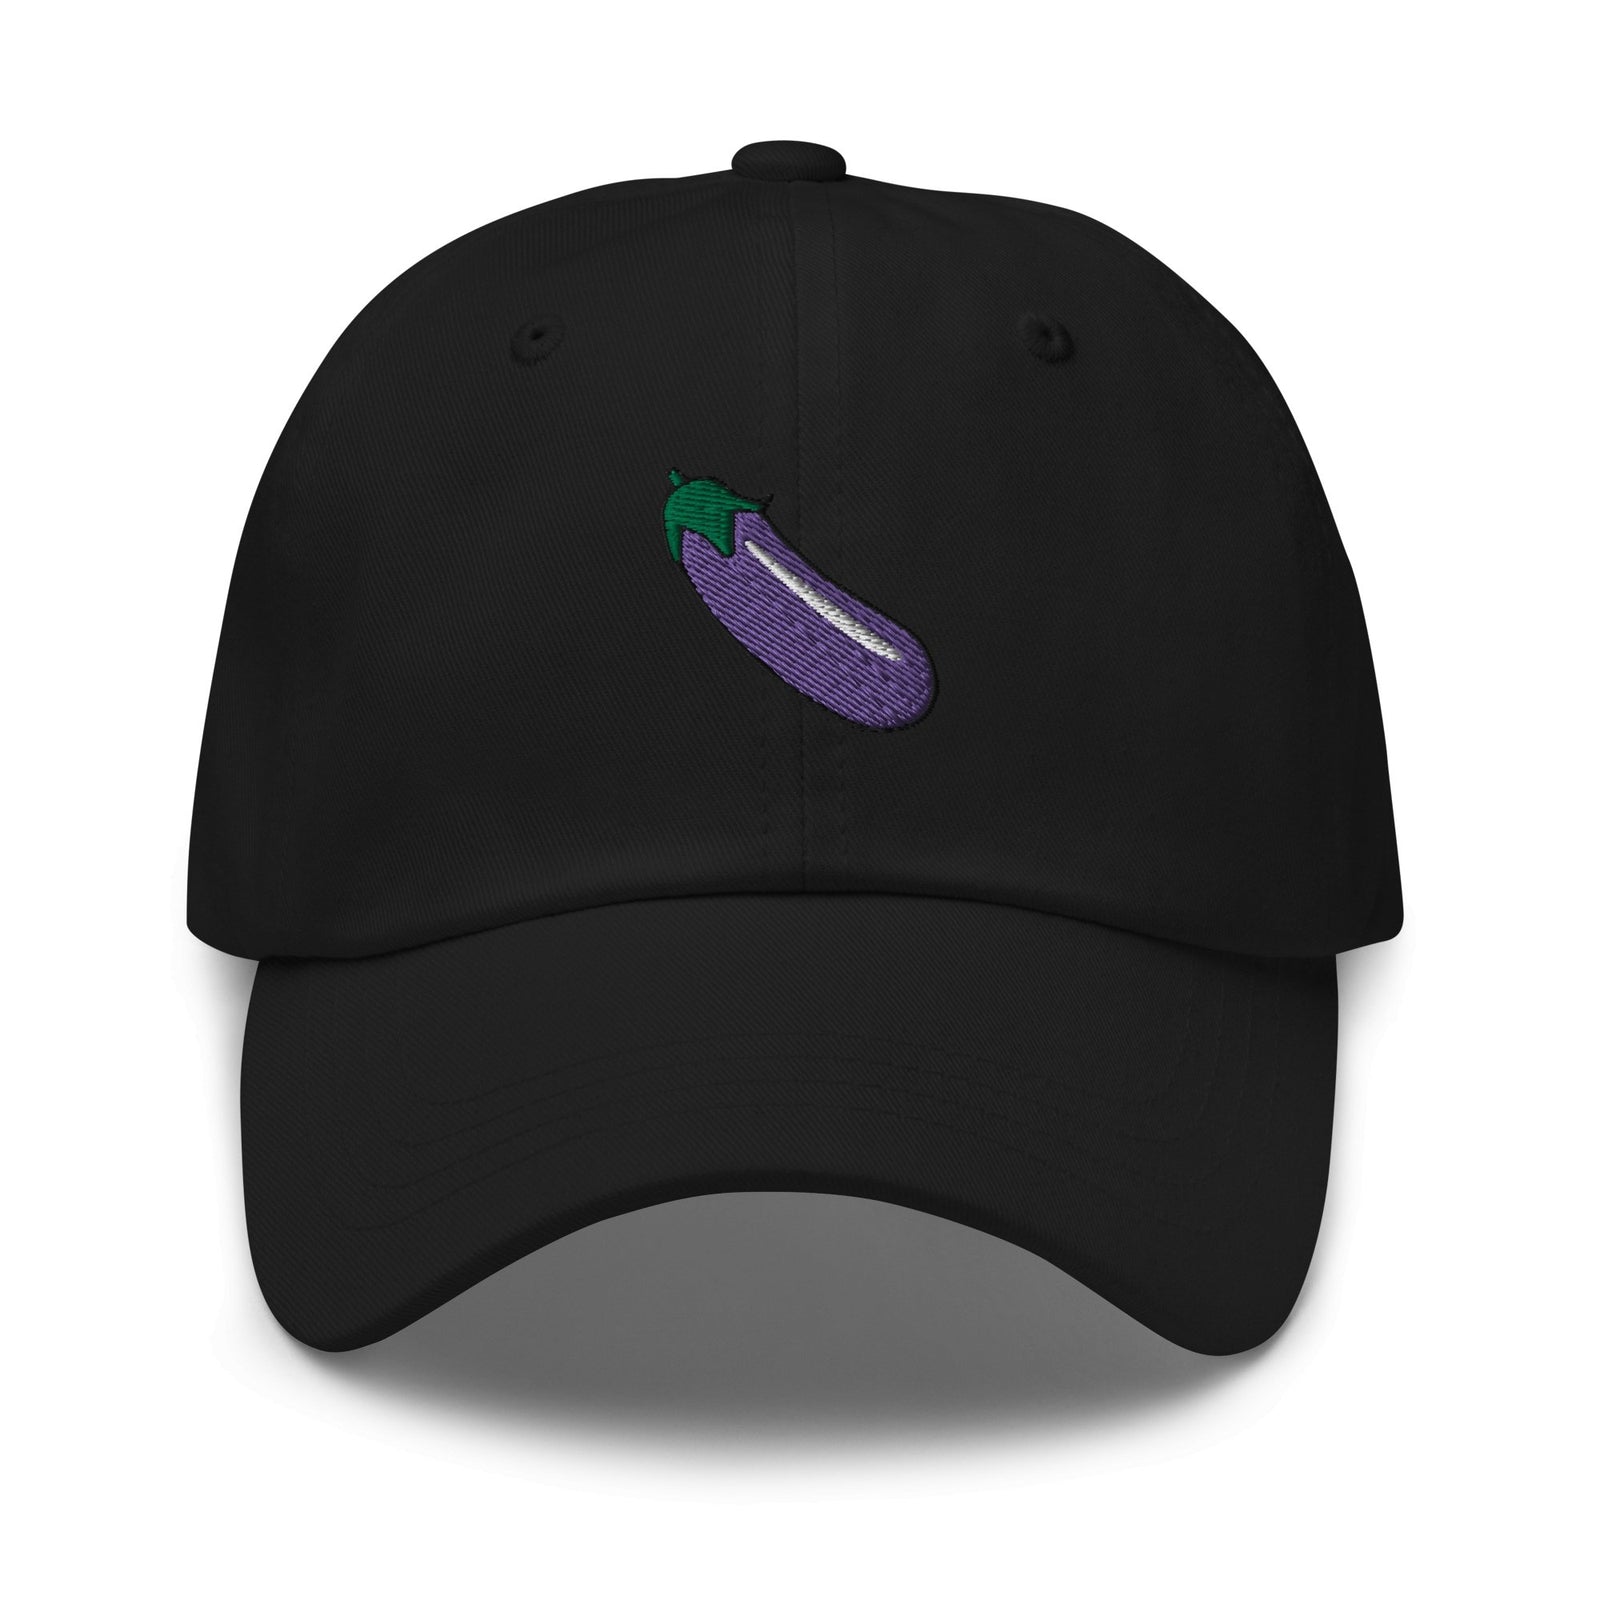 //cdn.shopify.com/s/files/1/0274/2488/2766/products/eggplant-dad-hat-357157_5000x.jpg?v=1652335609 5000w,
    //cdn.shopify.com/s/files/1/0274/2488/2766/products/eggplant-dad-hat-357157_4500x.jpg?v=1652335609 4500w,
    //cdn.shopify.com/s/files/1/0274/2488/2766/products/eggplant-dad-hat-357157_4000x.jpg?v=1652335609 4000w,
    //cdn.shopify.com/s/files/1/0274/2488/2766/products/eggplant-dad-hat-357157_3500x.jpg?v=1652335609 3500w,
    //cdn.shopify.com/s/files/1/0274/2488/2766/products/eggplant-dad-hat-357157_3000x.jpg?v=1652335609 3000w,
    //cdn.shopify.com/s/files/1/0274/2488/2766/products/eggplant-dad-hat-357157_2500x.jpg?v=1652335609 2500w,
    //cdn.shopify.com/s/files/1/0274/2488/2766/products/eggplant-dad-hat-357157_2000x.jpg?v=1652335609 2000w,
    //cdn.shopify.com/s/files/1/0274/2488/2766/products/eggplant-dad-hat-357157_1800x.jpg?v=1652335609 1800w,
    //cdn.shopify.com/s/files/1/0274/2488/2766/products/eggplant-dad-hat-357157_1600x.jpg?v=1652335609 1600w,
    //cdn.shopify.com/s/files/1/0274/2488/2766/products/eggplant-dad-hat-357157_1400x.jpg?v=1652335609 1400w,
    //cdn.shopify.com/s/files/1/0274/2488/2766/products/eggplant-dad-hat-357157_1200x.jpg?v=1652335609 1200w,
    //cdn.shopify.com/s/files/1/0274/2488/2766/products/eggplant-dad-hat-357157_1000x.jpg?v=1652335609 1000w,
    //cdn.shopify.com/s/files/1/0274/2488/2766/products/eggplant-dad-hat-357157_800x.jpg?v=1652335609 800w,
    //cdn.shopify.com/s/files/1/0274/2488/2766/products/eggplant-dad-hat-357157_600x.jpg?v=1652335609 600w,
    //cdn.shopify.com/s/files/1/0274/2488/2766/products/eggplant-dad-hat-357157_400x.jpg?v=1652335609 400w,
    //cdn.shopify.com/s/files/1/0274/2488/2766/products/eggplant-dad-hat-357157_200x.jpg?v=1652335609 200w